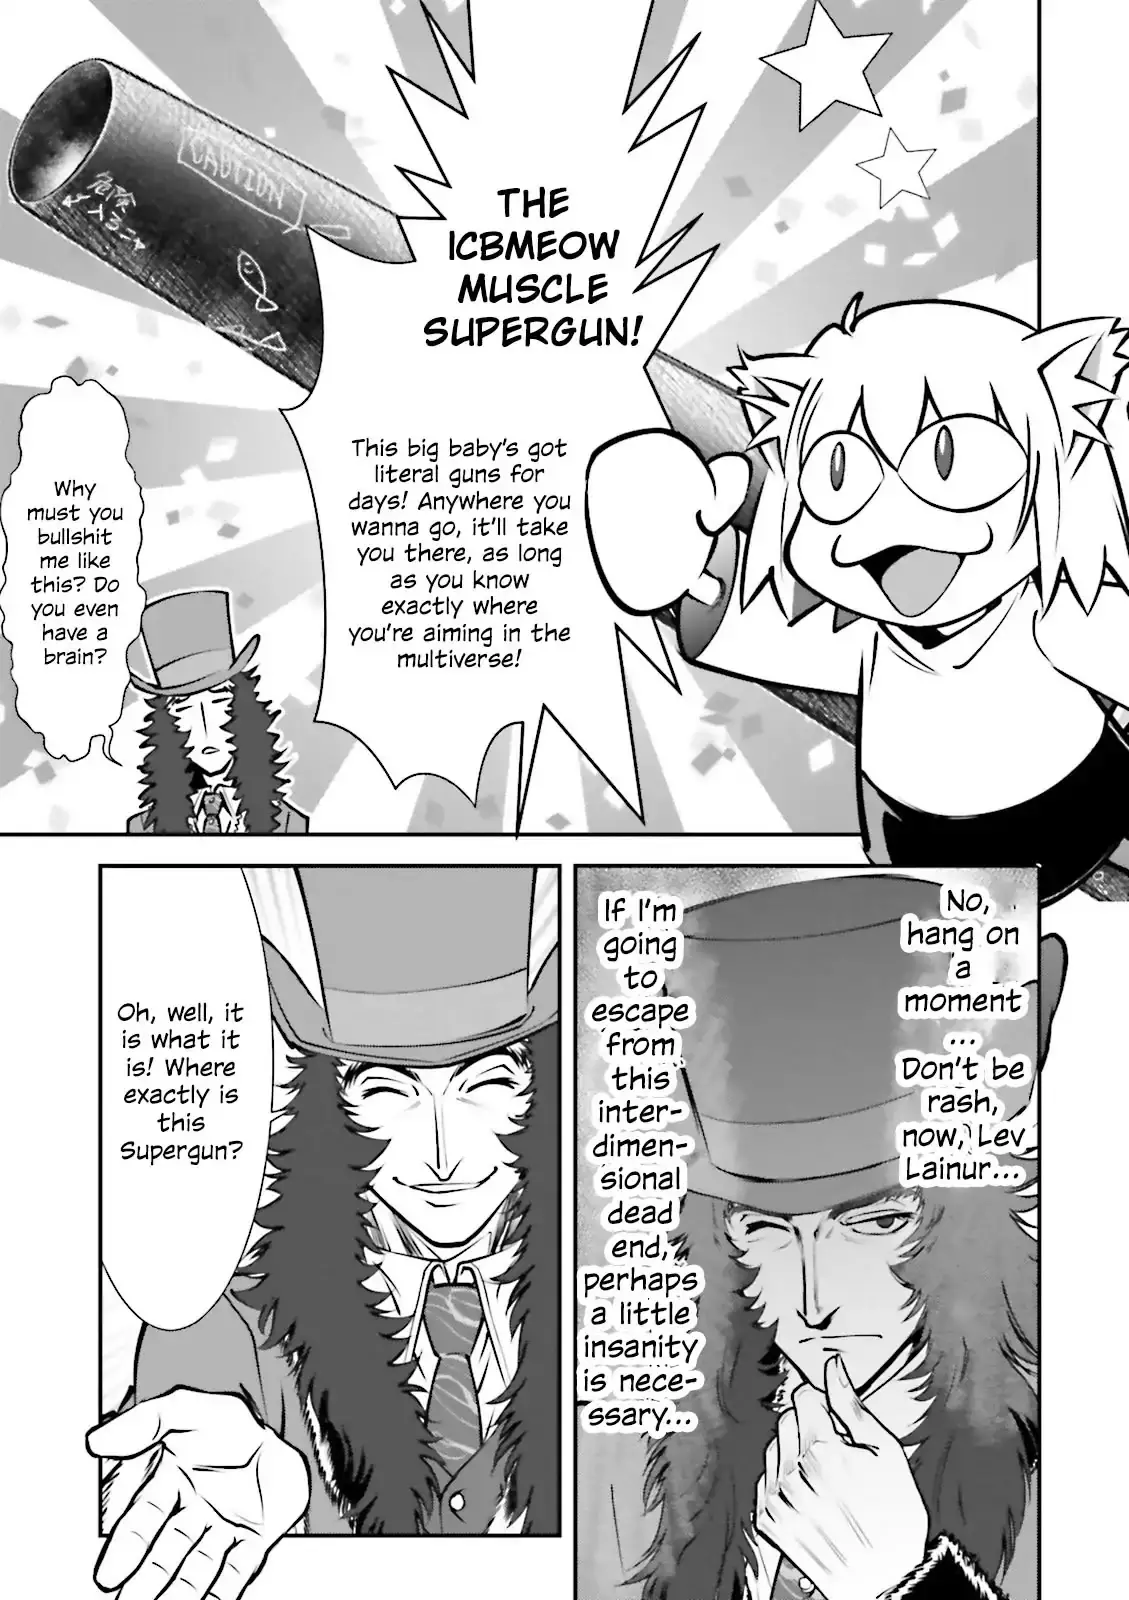 Melty Blood - Back Alley Alliance Nightmare - 2 page 5